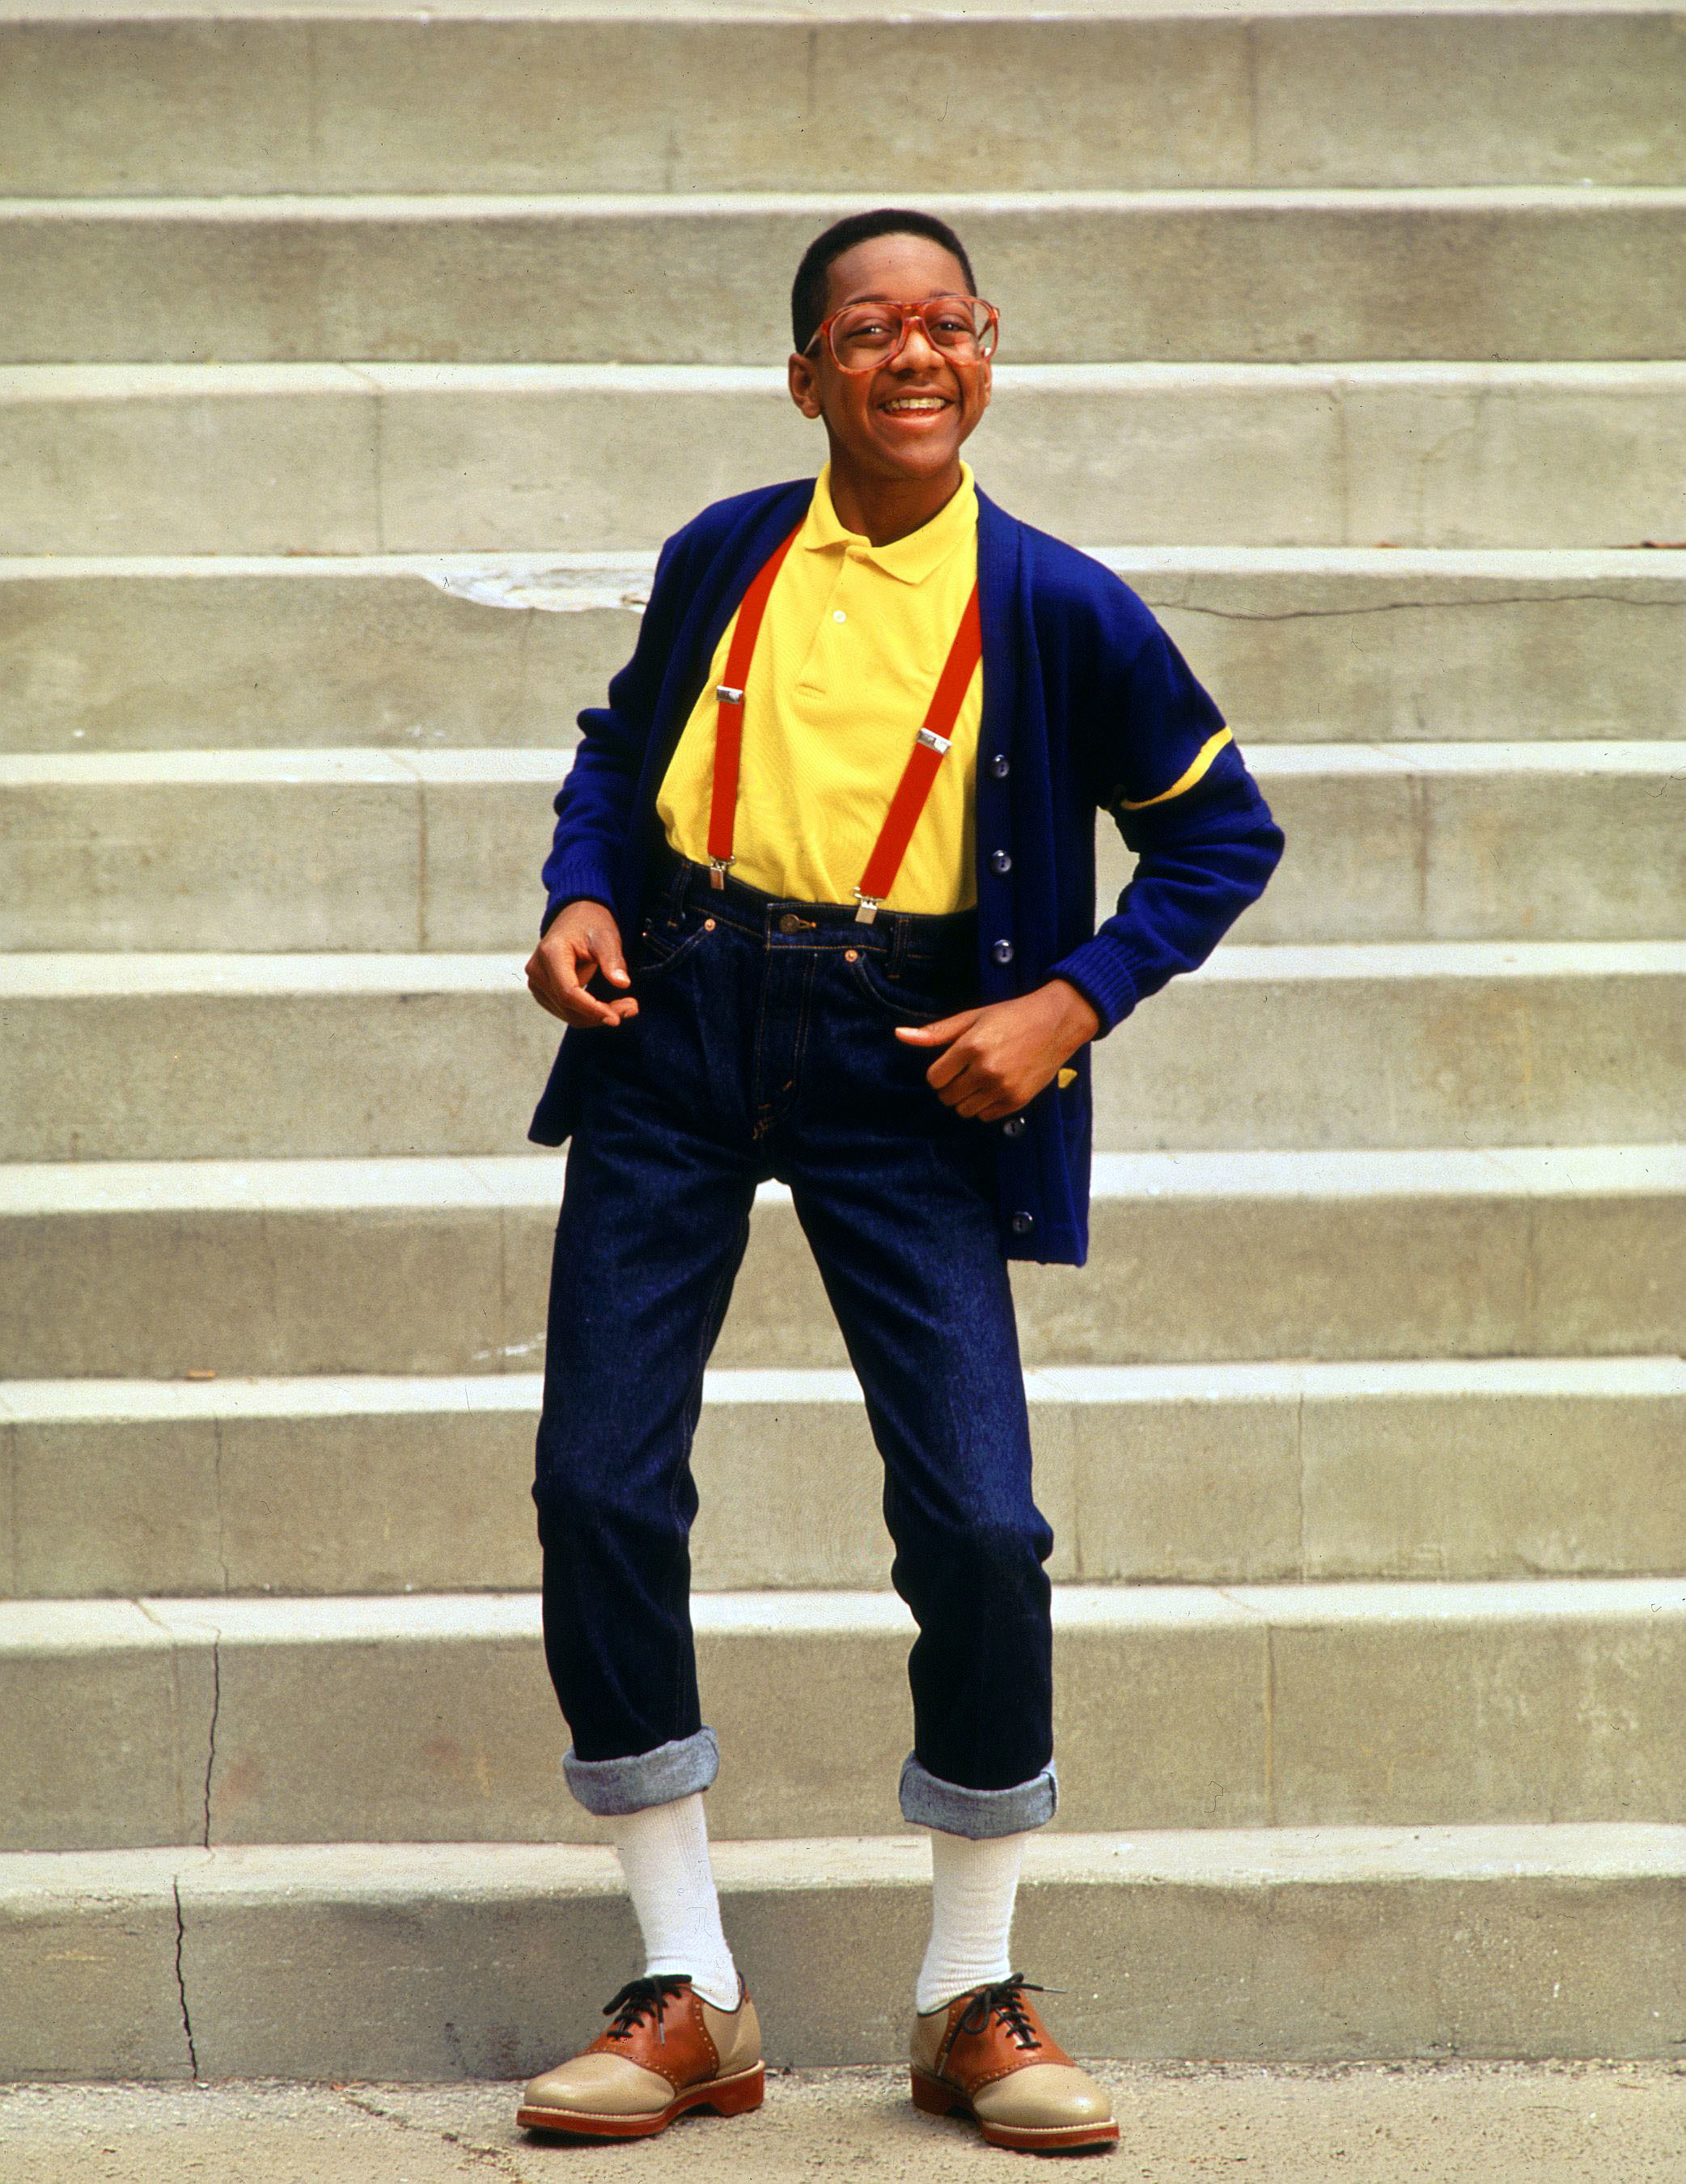 <p>Friday nights in the '90s were not complete without Jaleel White, who played nerdy, accident-prone Steve Urkel on "Family Matters." While the part was supposed to have been a one-episode guest-starring role, Urkel was so beloved that 13-year-old Jaleel was given a full-time starring gig.</p>